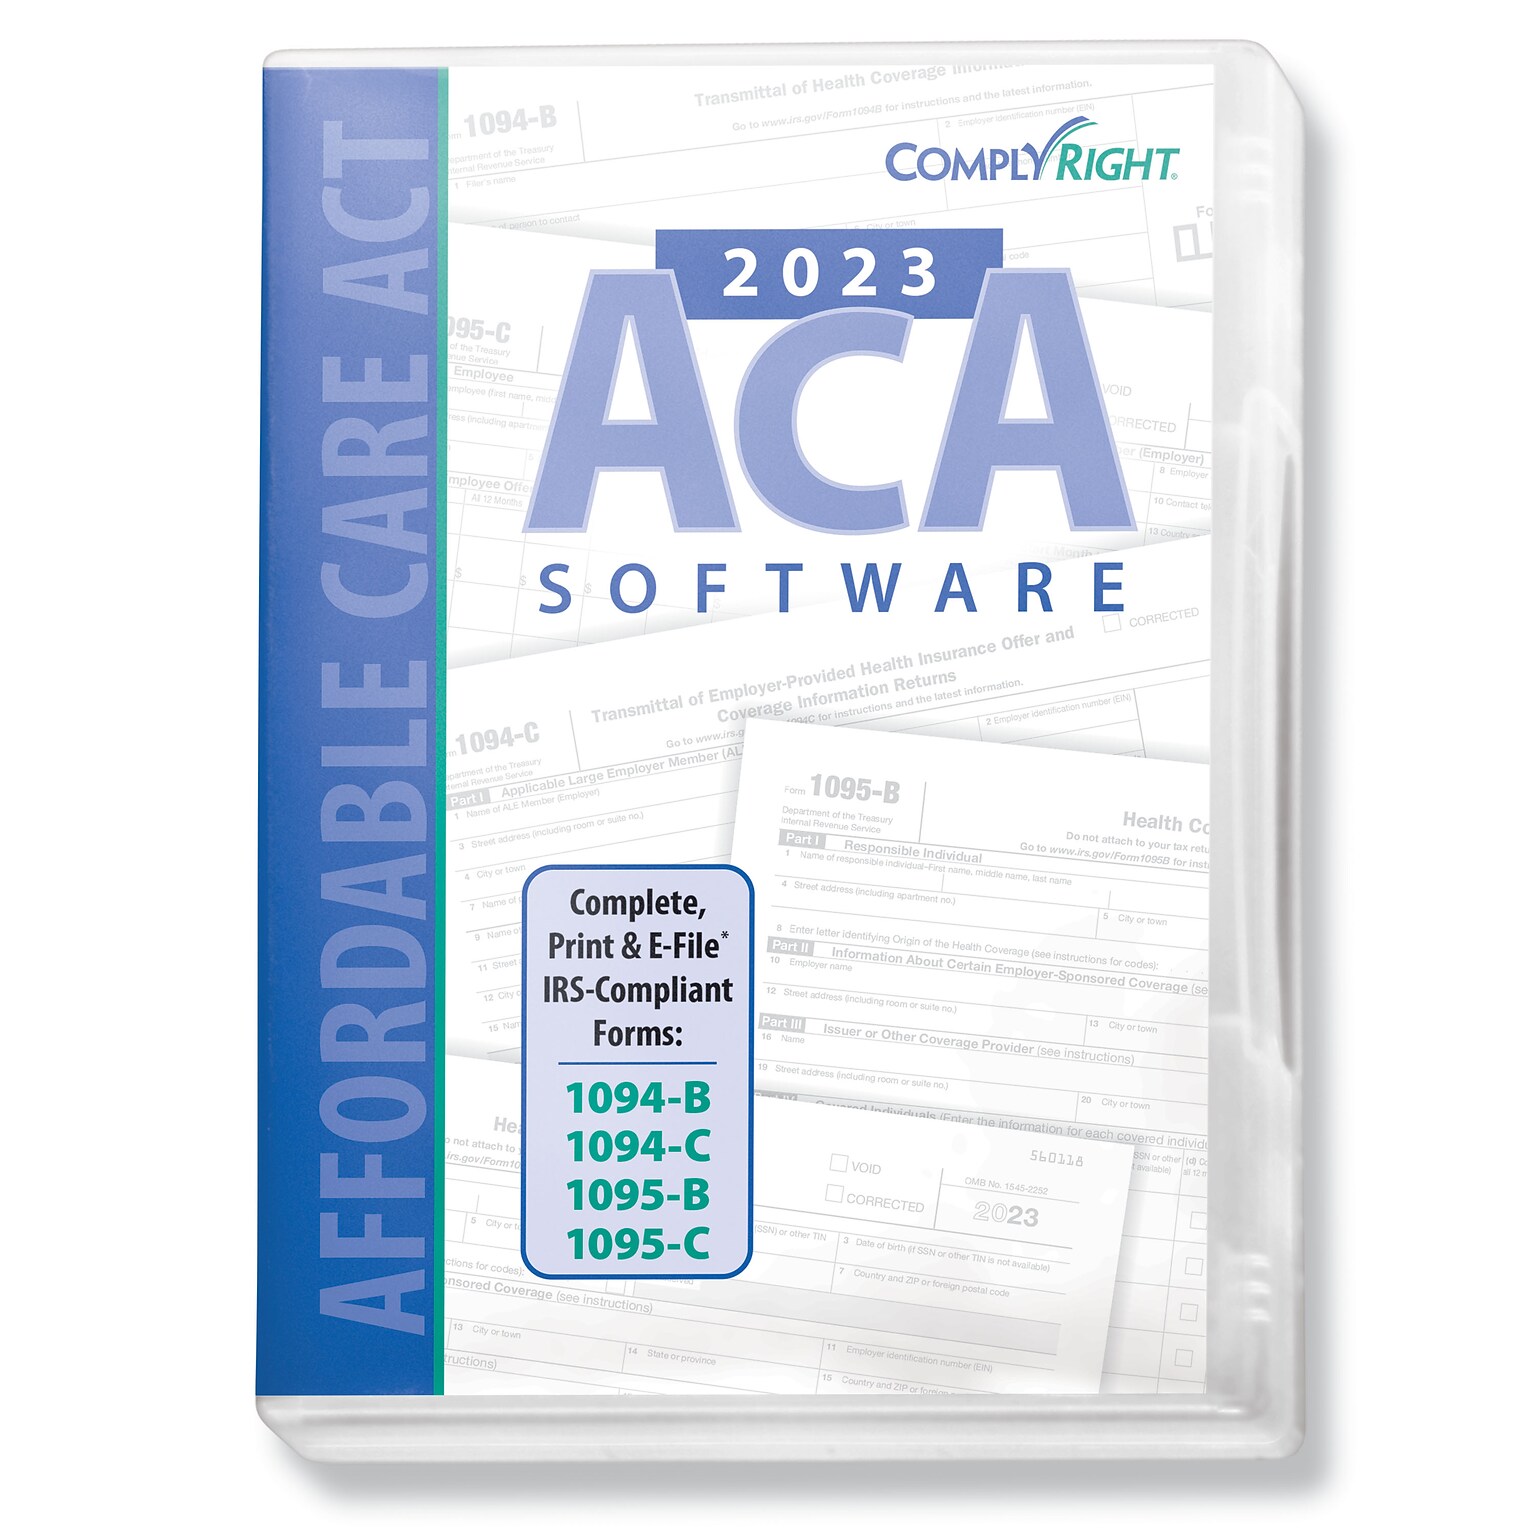 ComplyRight 2023 Affordable Care Act Tax Software (14035ST)